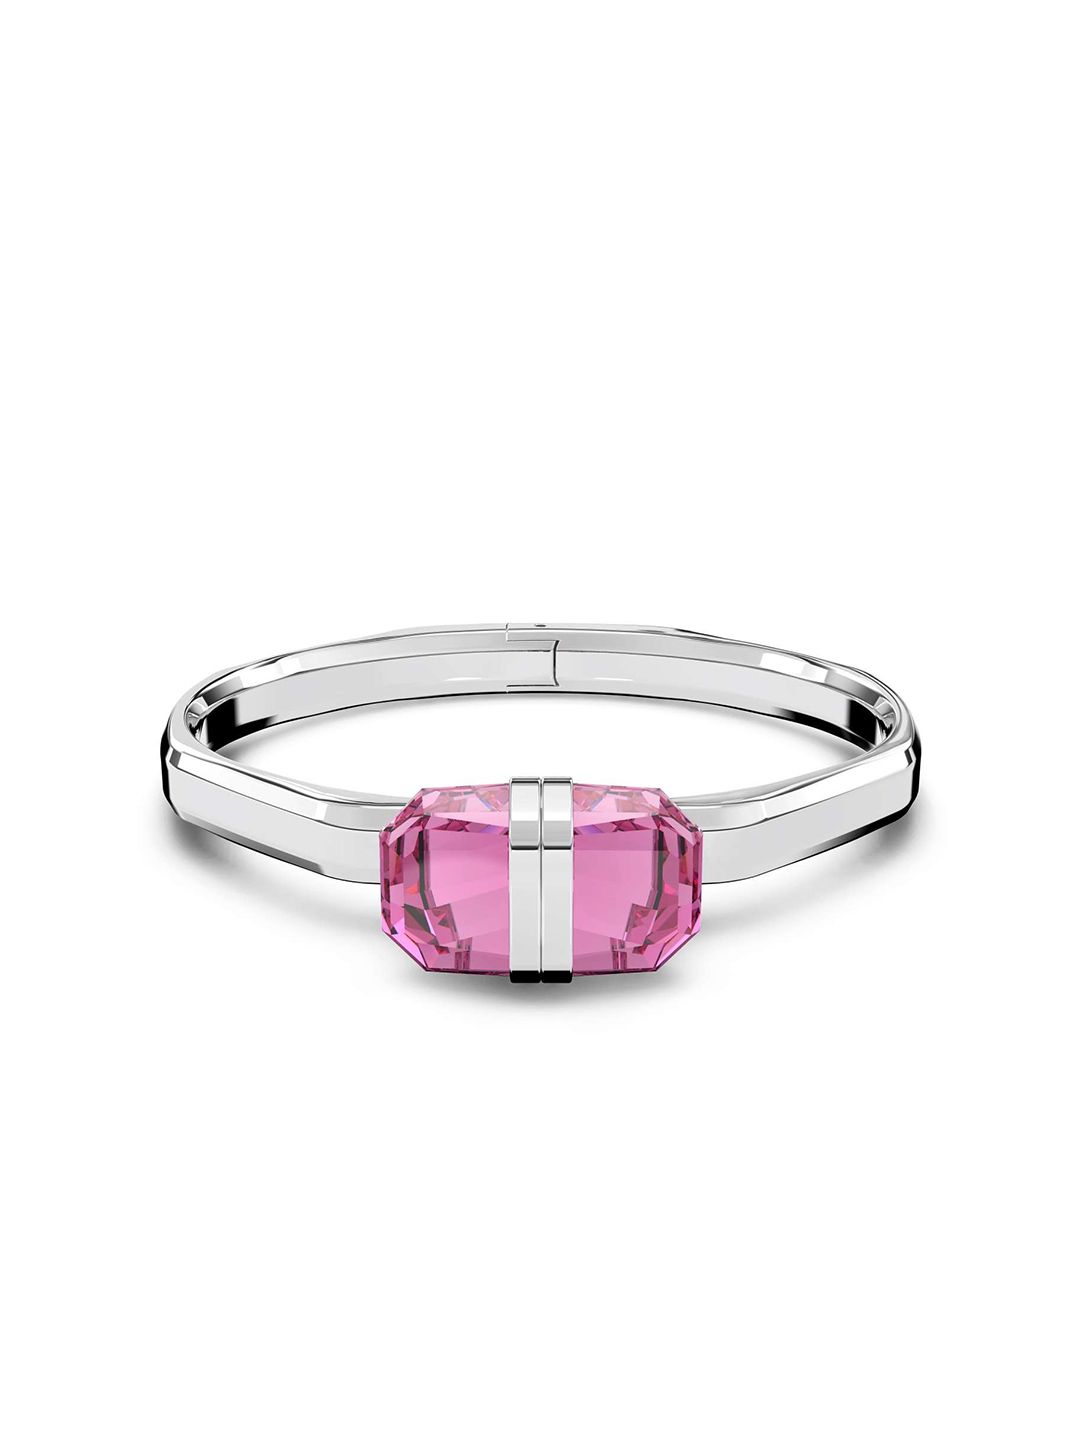 SWAROVSKI Women Pink & Silver-Toned Crystals Silver-Plated Bangle-Style Bracelet Price in India